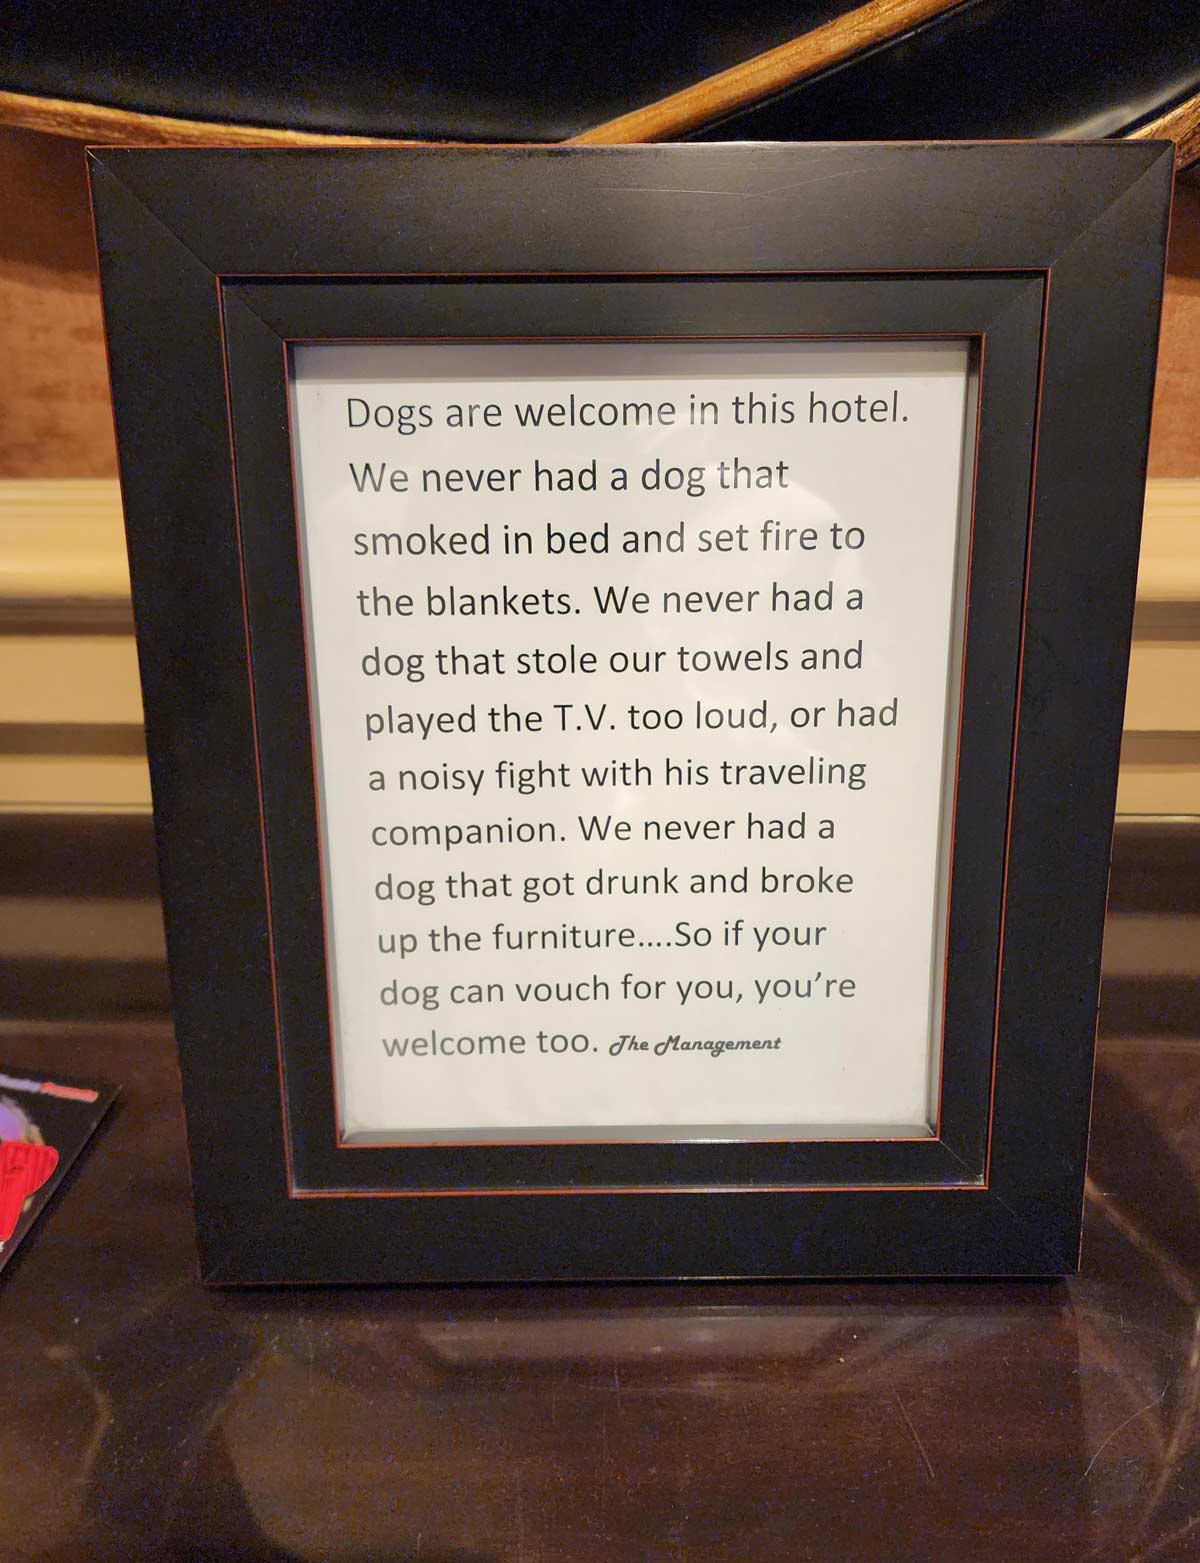 Dogs are welcome..